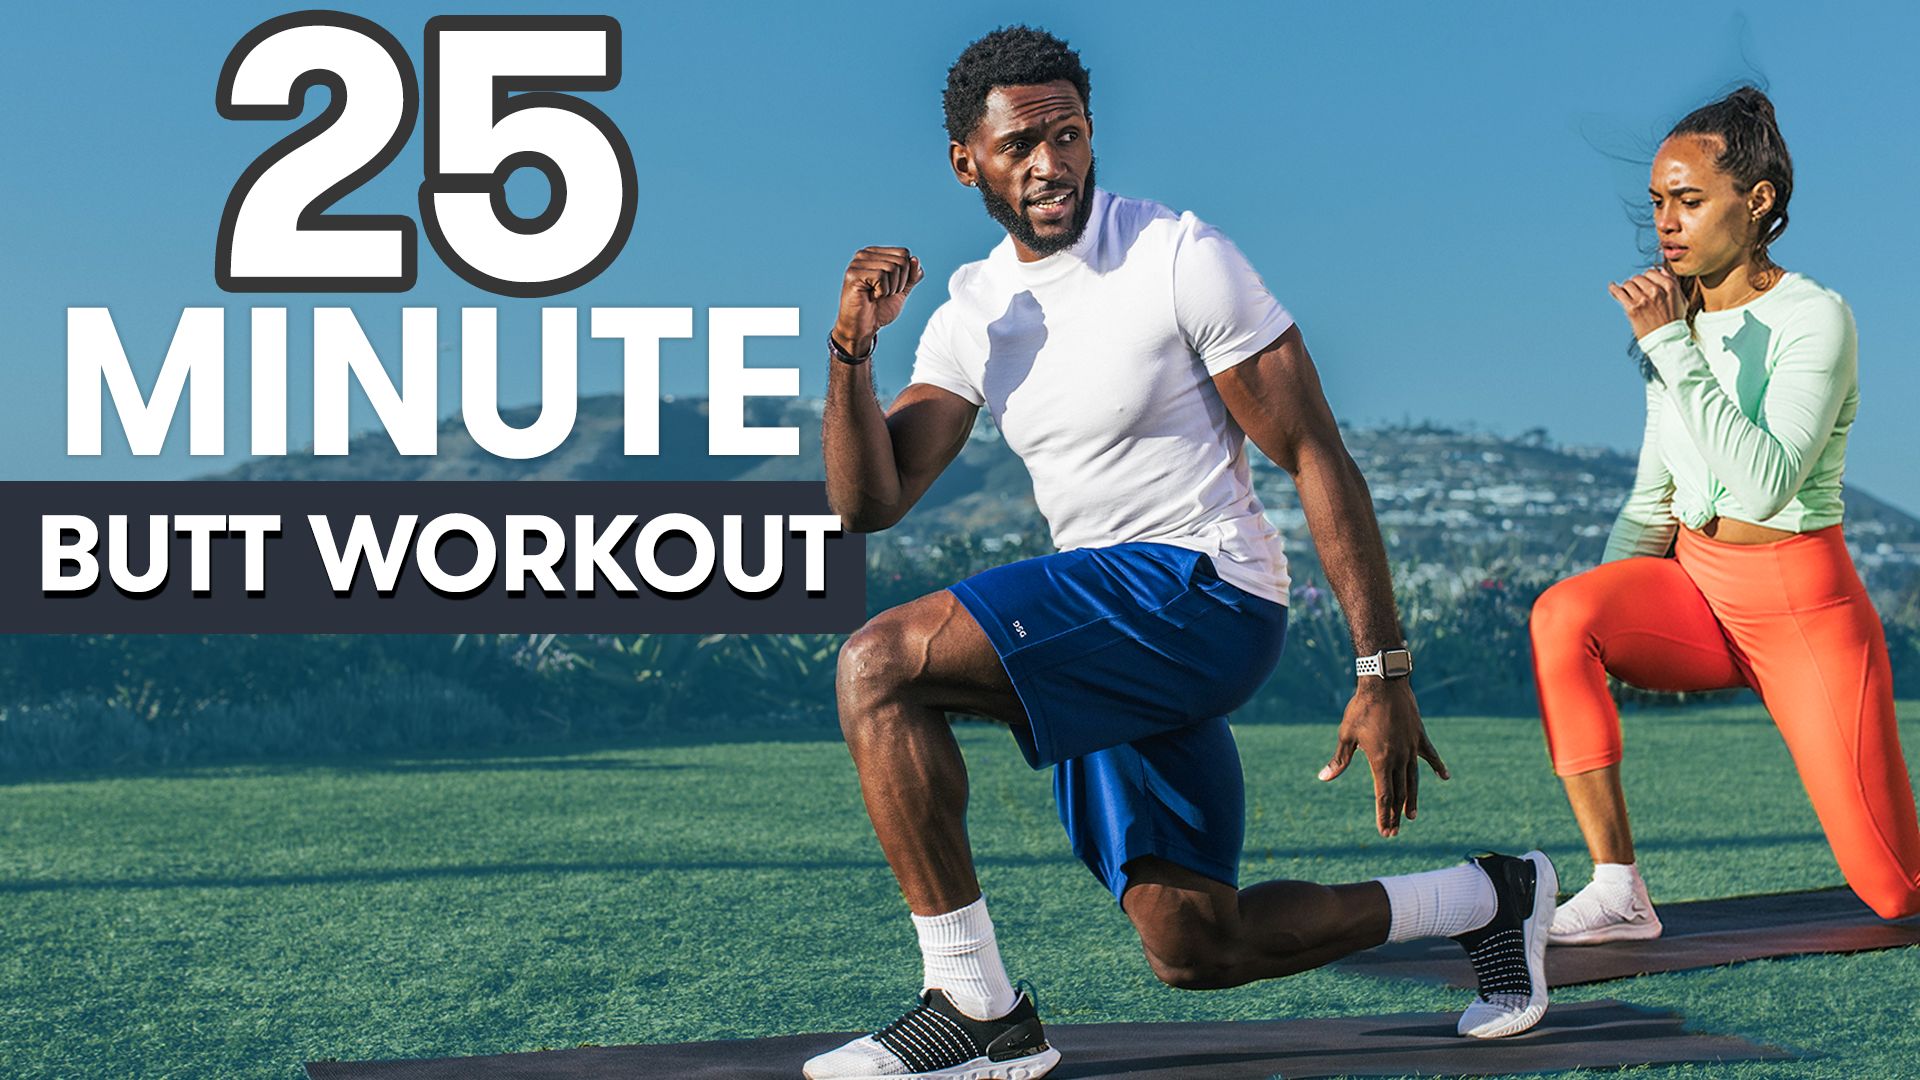 20-Minute Legs Workout for Strength - No Equipment with Warm Up